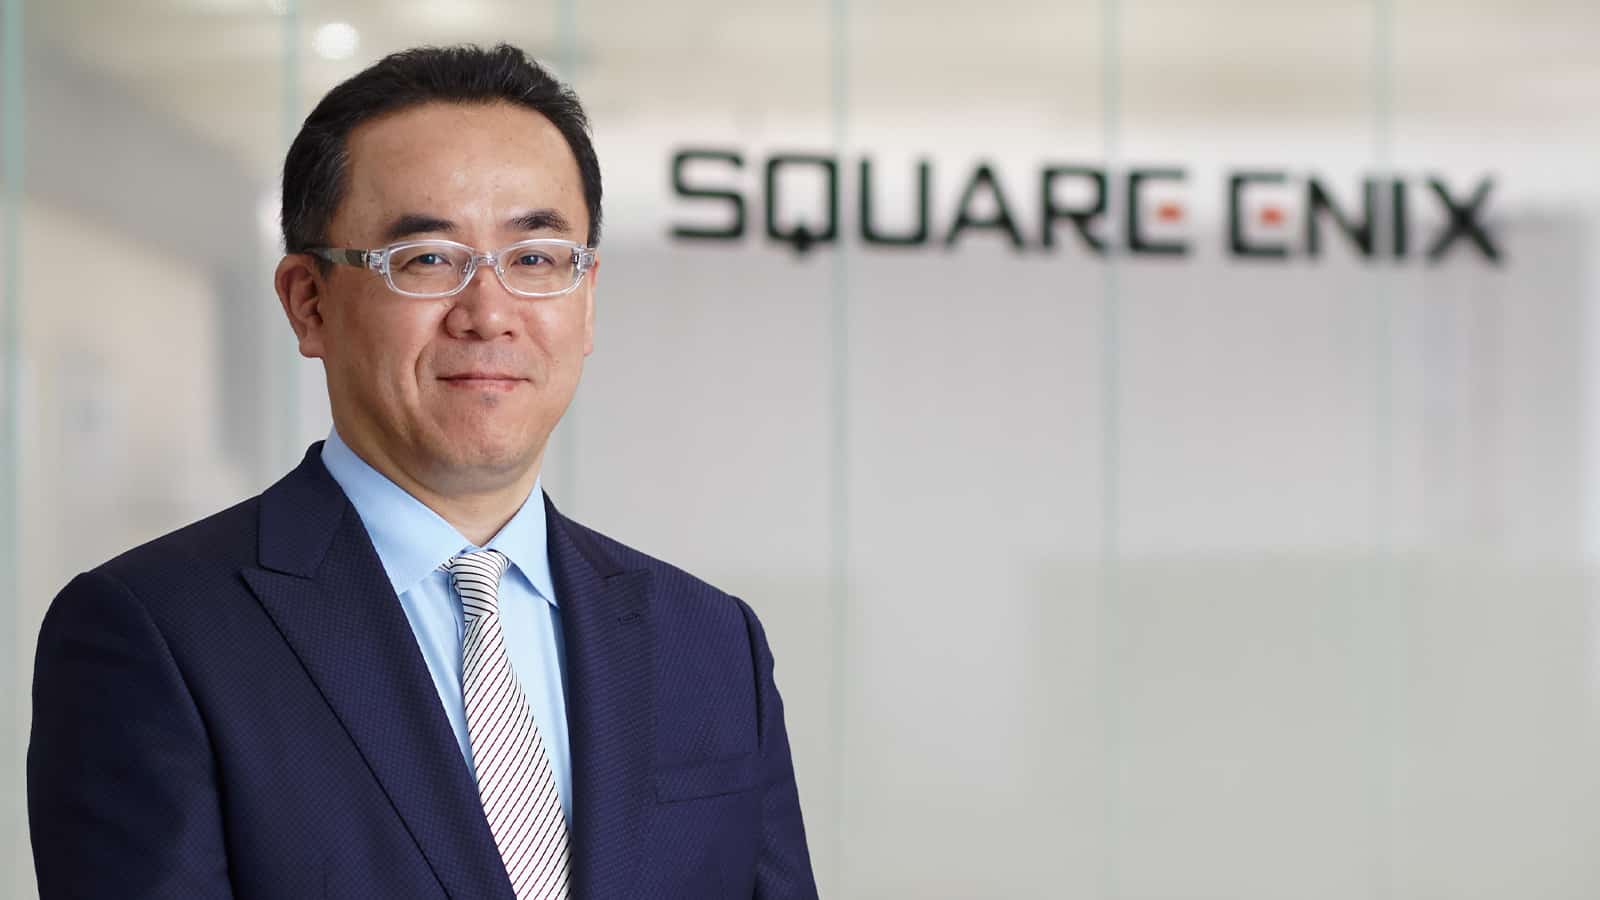 Square Enix fans hit out at company over NFT plans for 2022 - Dexerto